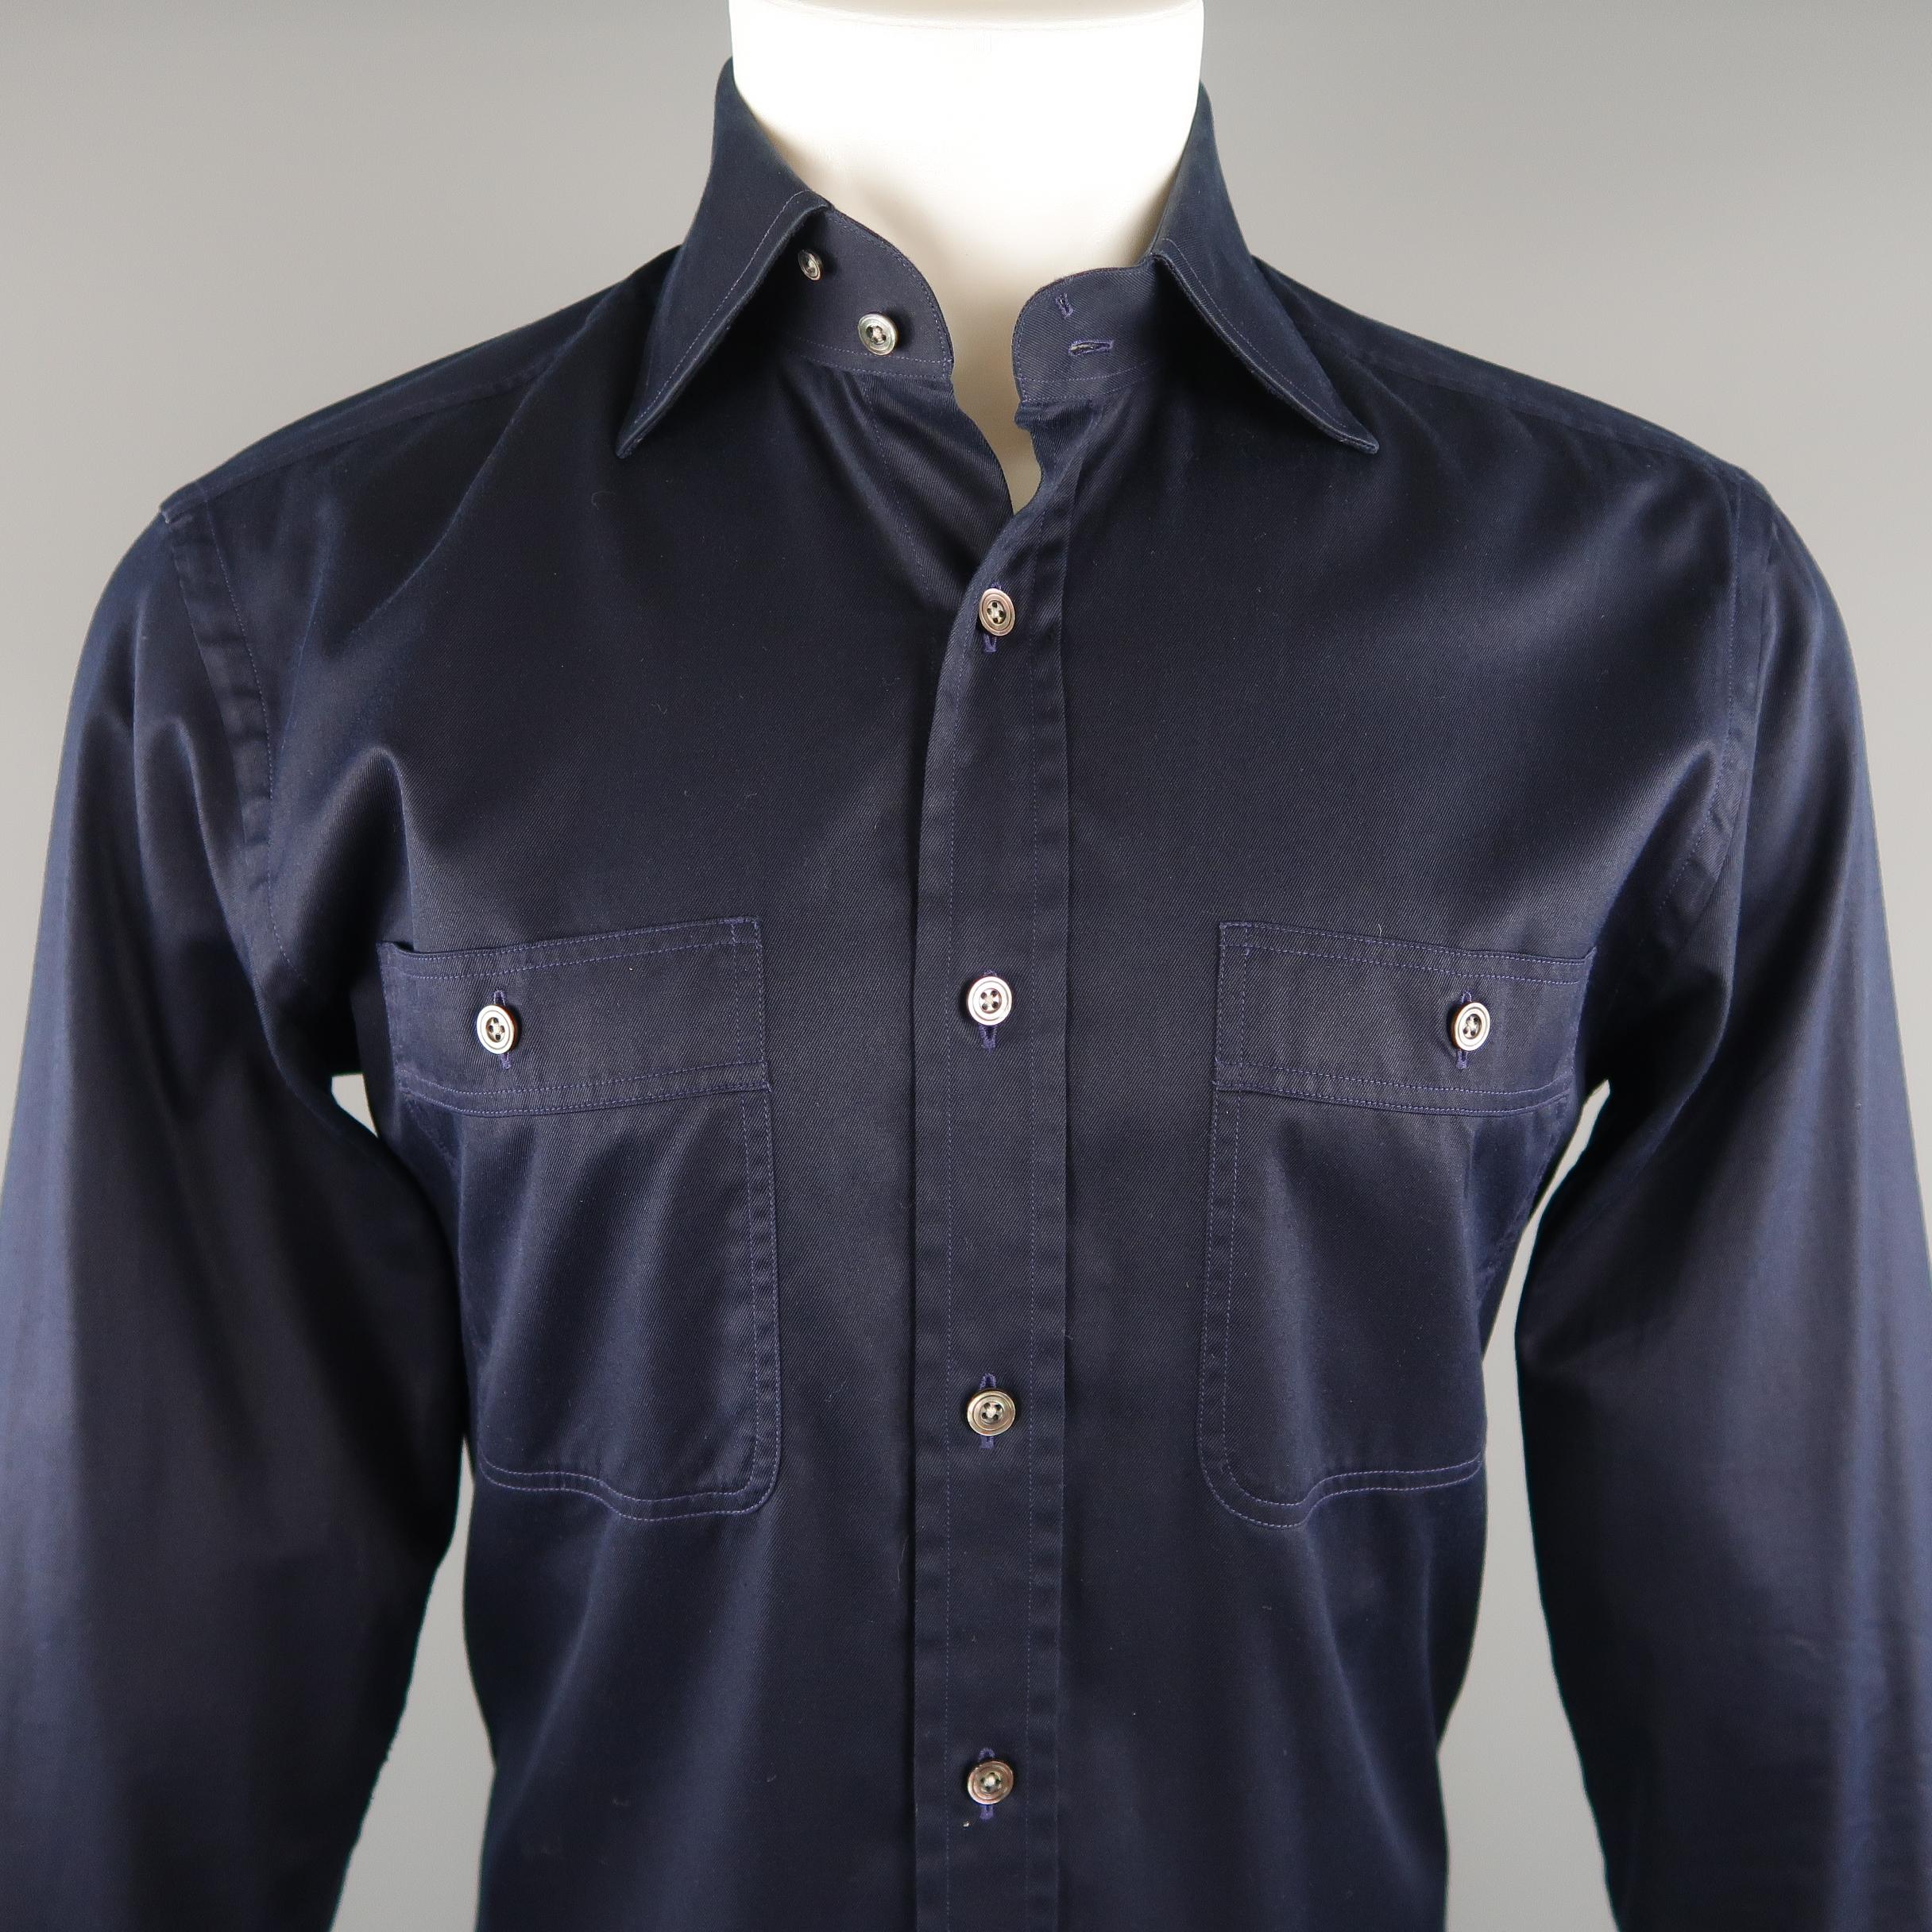 TOM FORD shirt come in a navy tone in a solid cotton, button up, patch pockets and long sleeves. Light marks of wear inside the collar. Made in Switzerland.
 
Excellent Pre-Owned Condition.
Marked: 41 IT
 
Measurements:
 
Shoulder: 17.5  in.
Chest: